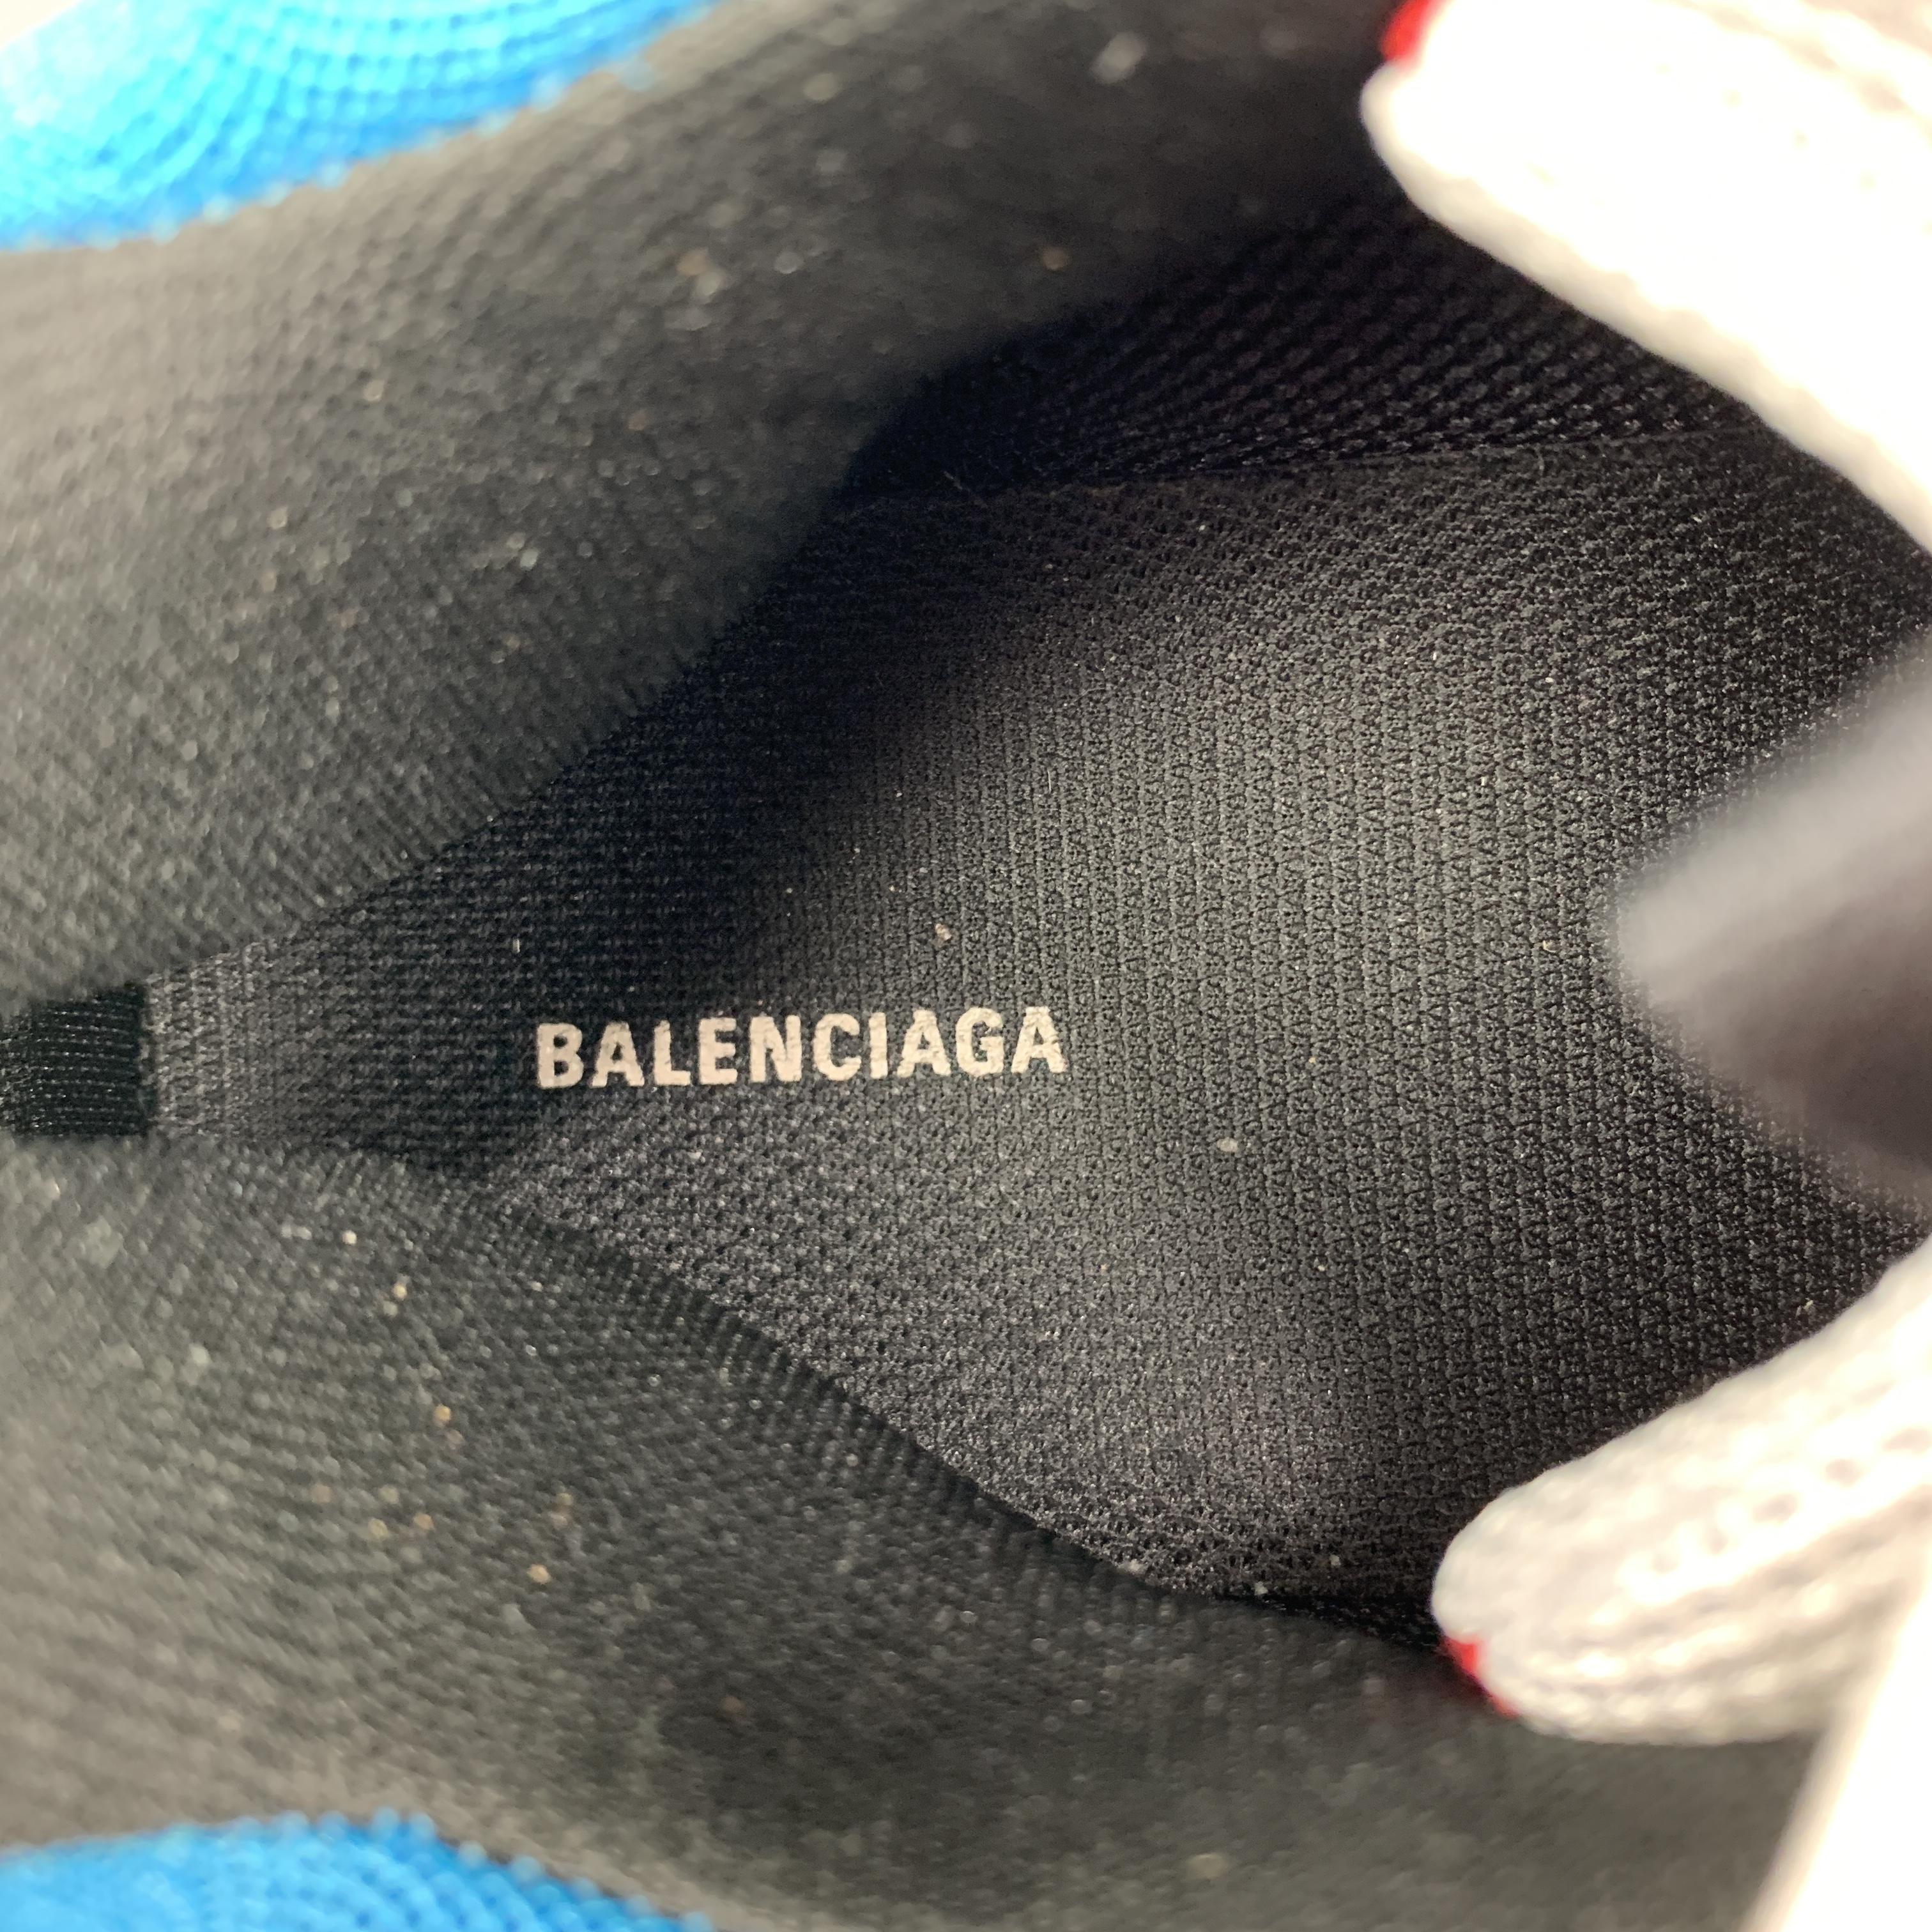 what is a size 10 in balenciaga